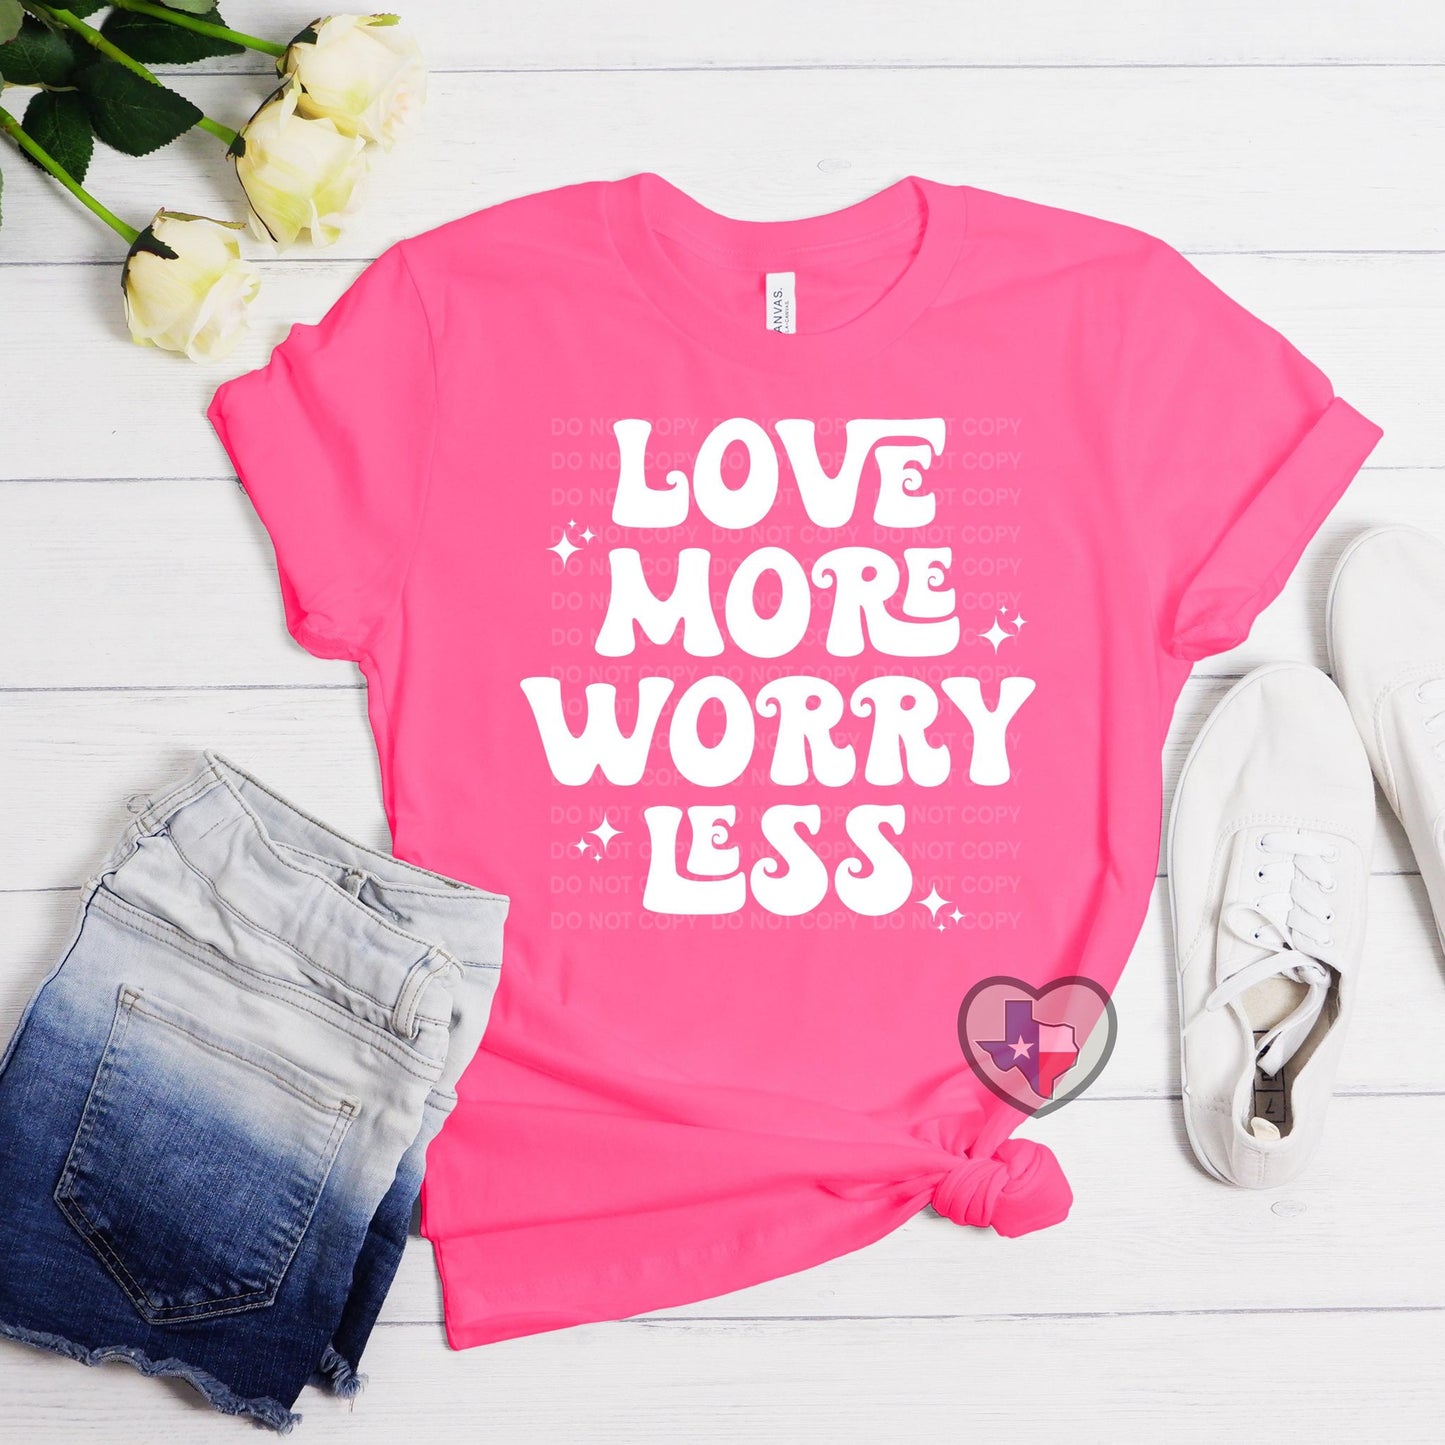 Love More Worry Less *PUFF TRANSFER*